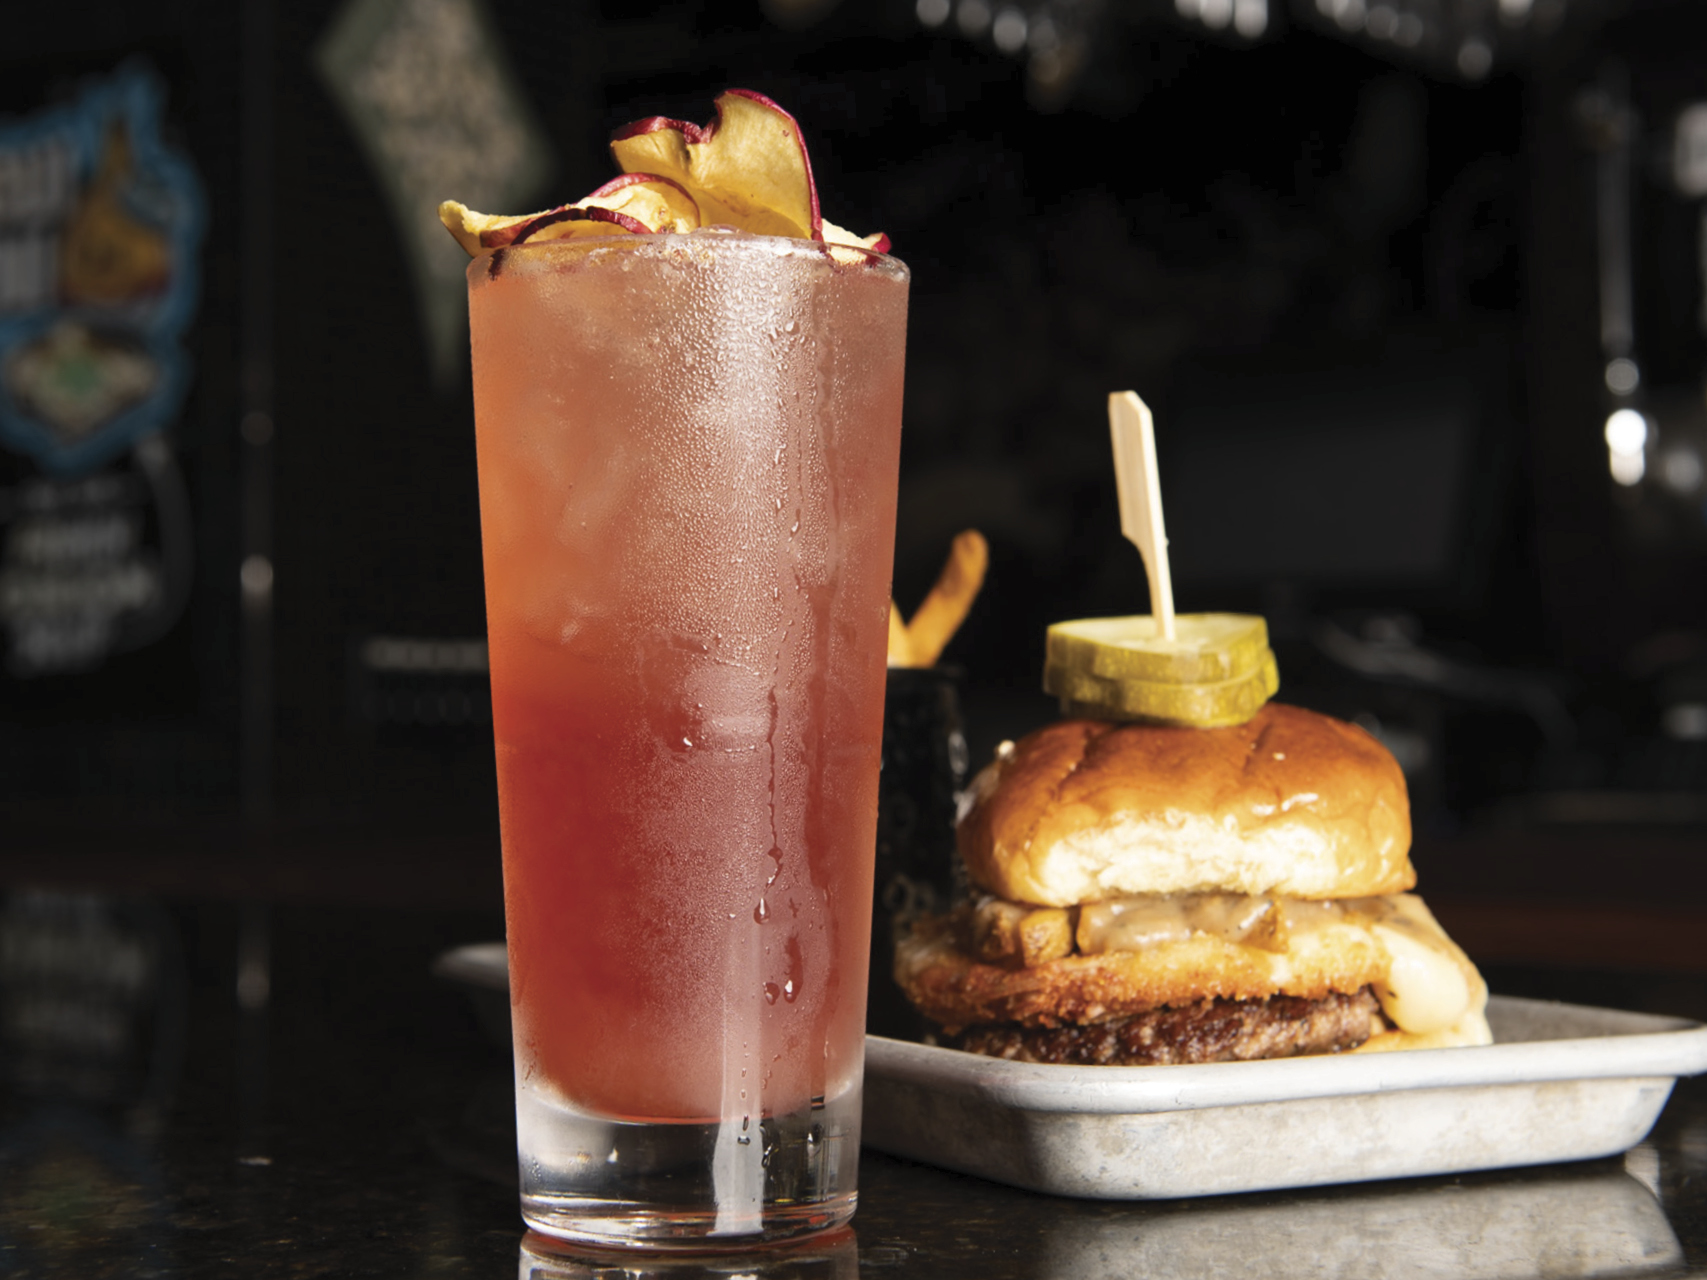 Bar Louie's featured Cocktail for this program is the Bourbon Apple Highball: Maker's Mark Bourbon, Pama Liqueur, apple, cranberry, lemon, Fever Tree Ginger Beer, topped with apple chips.